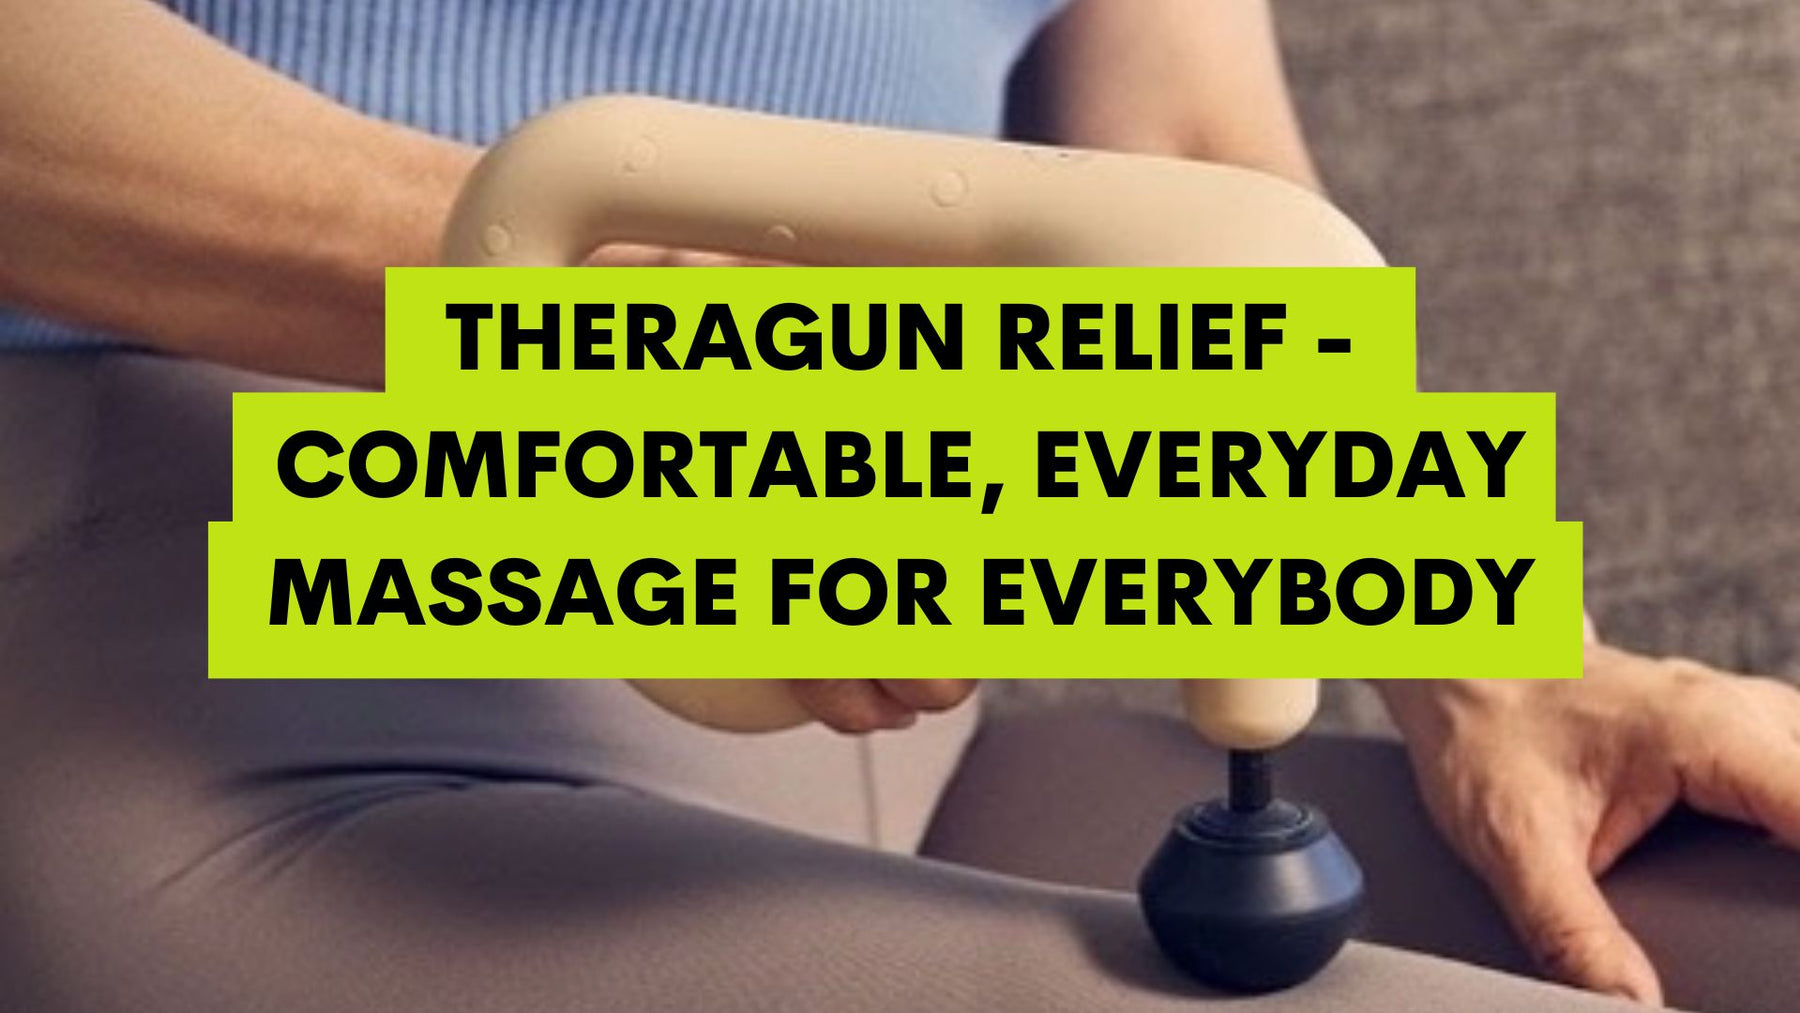 Theragun Relief - Comfortable, everyday massage for everybody